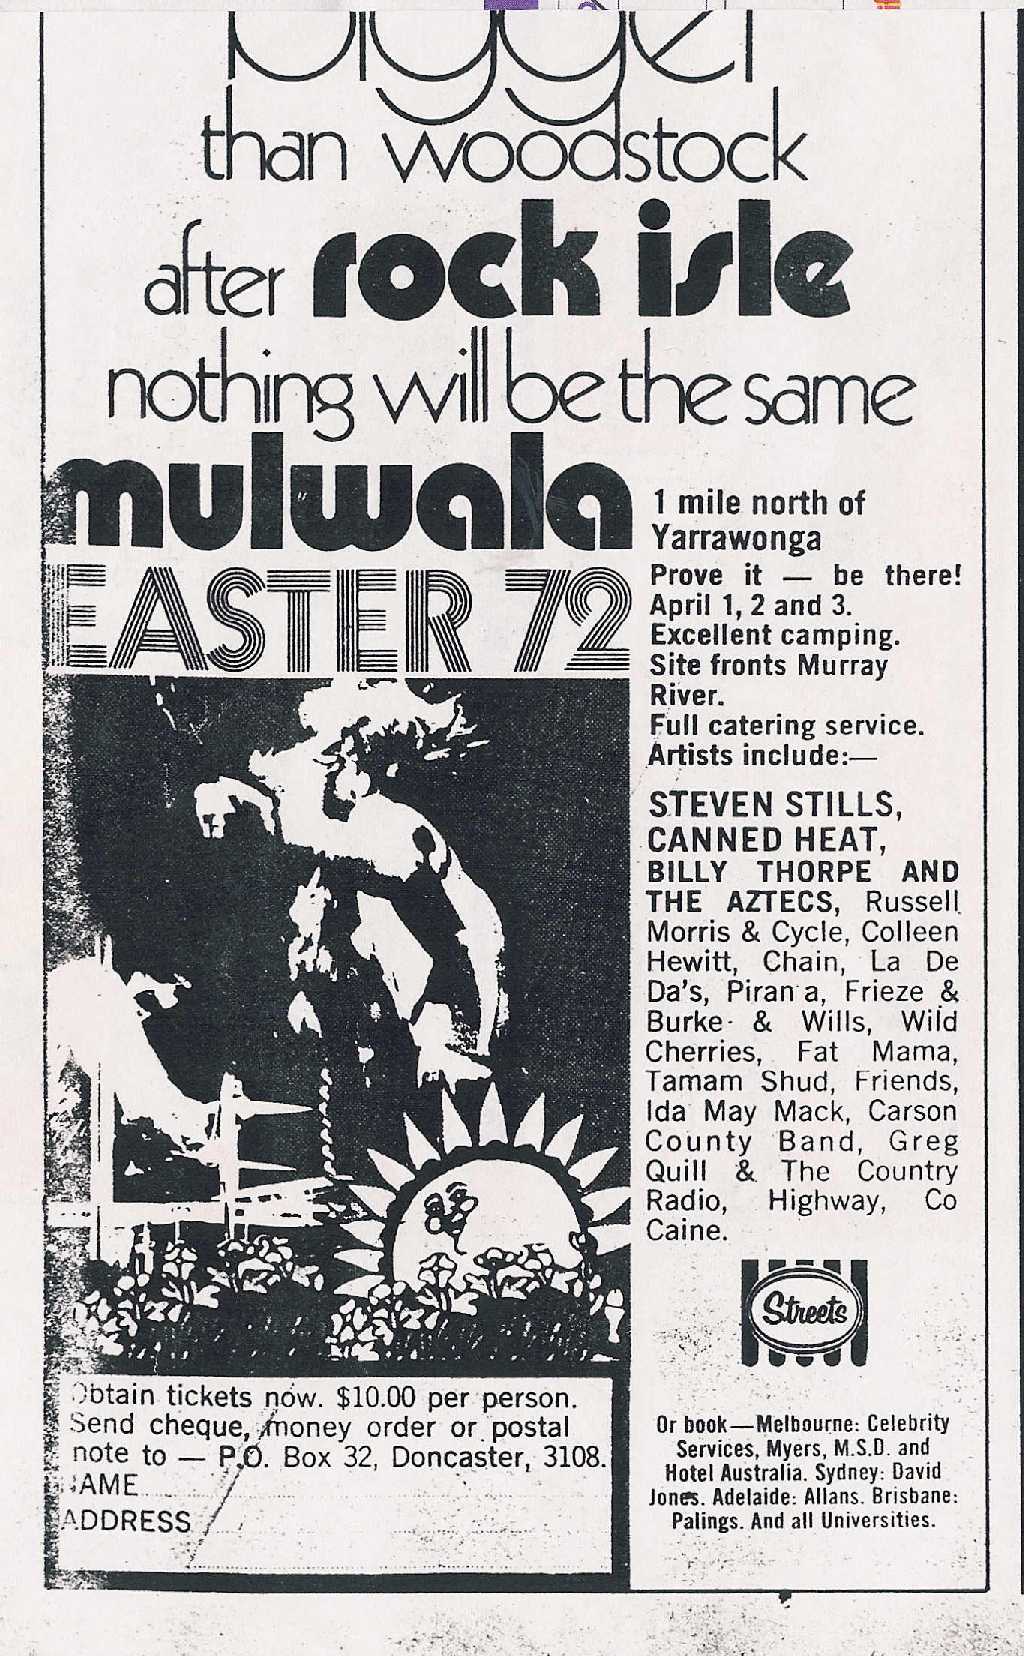 A Rock Isle Mulwala Festival advertisement from Daily Planet in early 1972. Click to see the full-size image